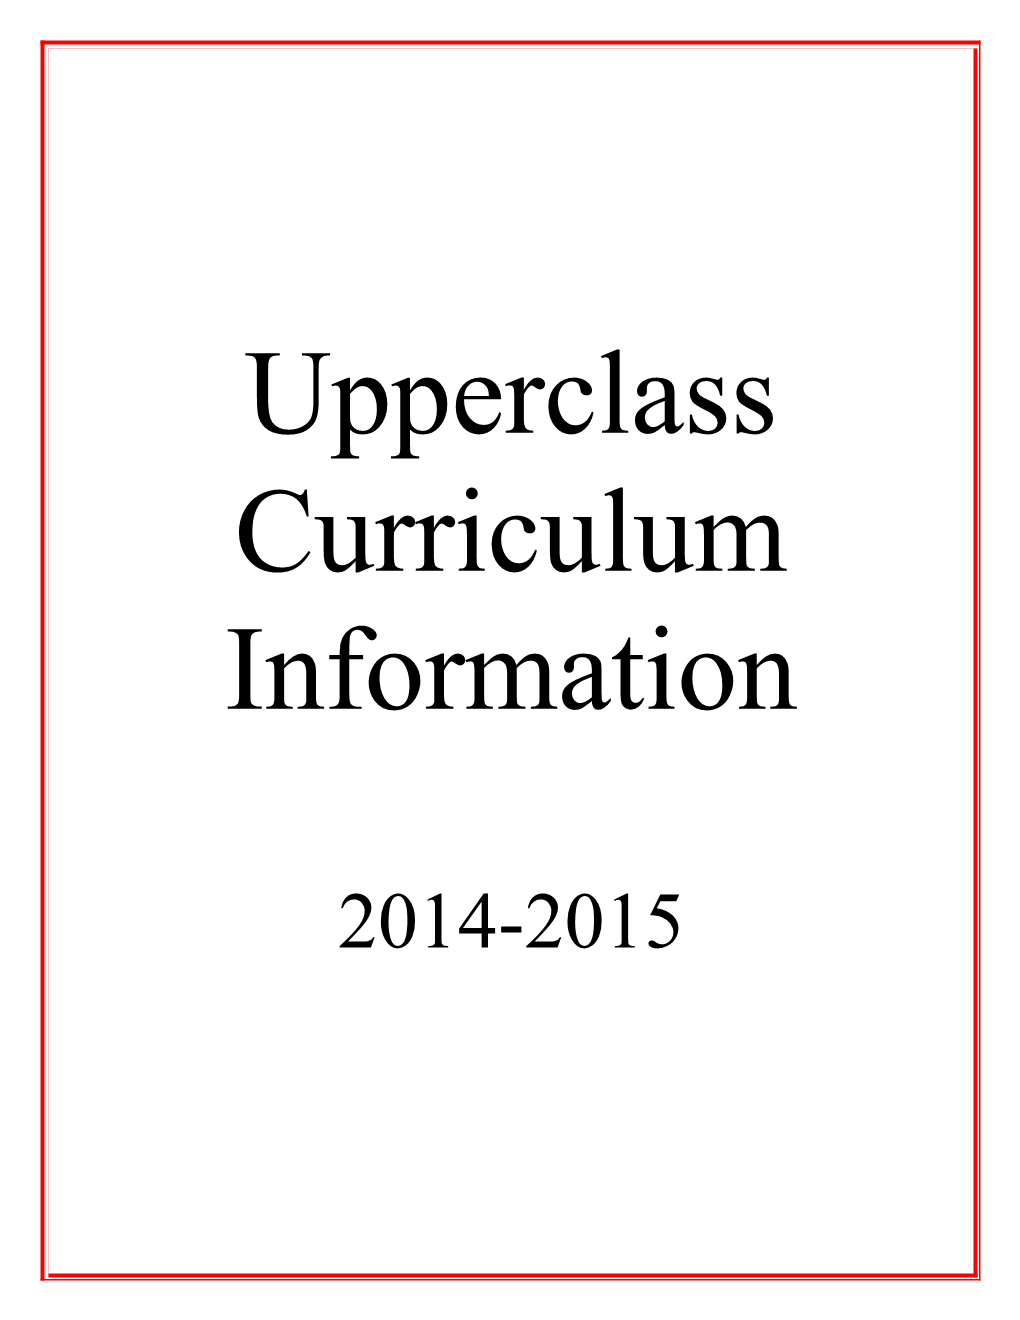 General Considerations of the Upperclass Curriculum